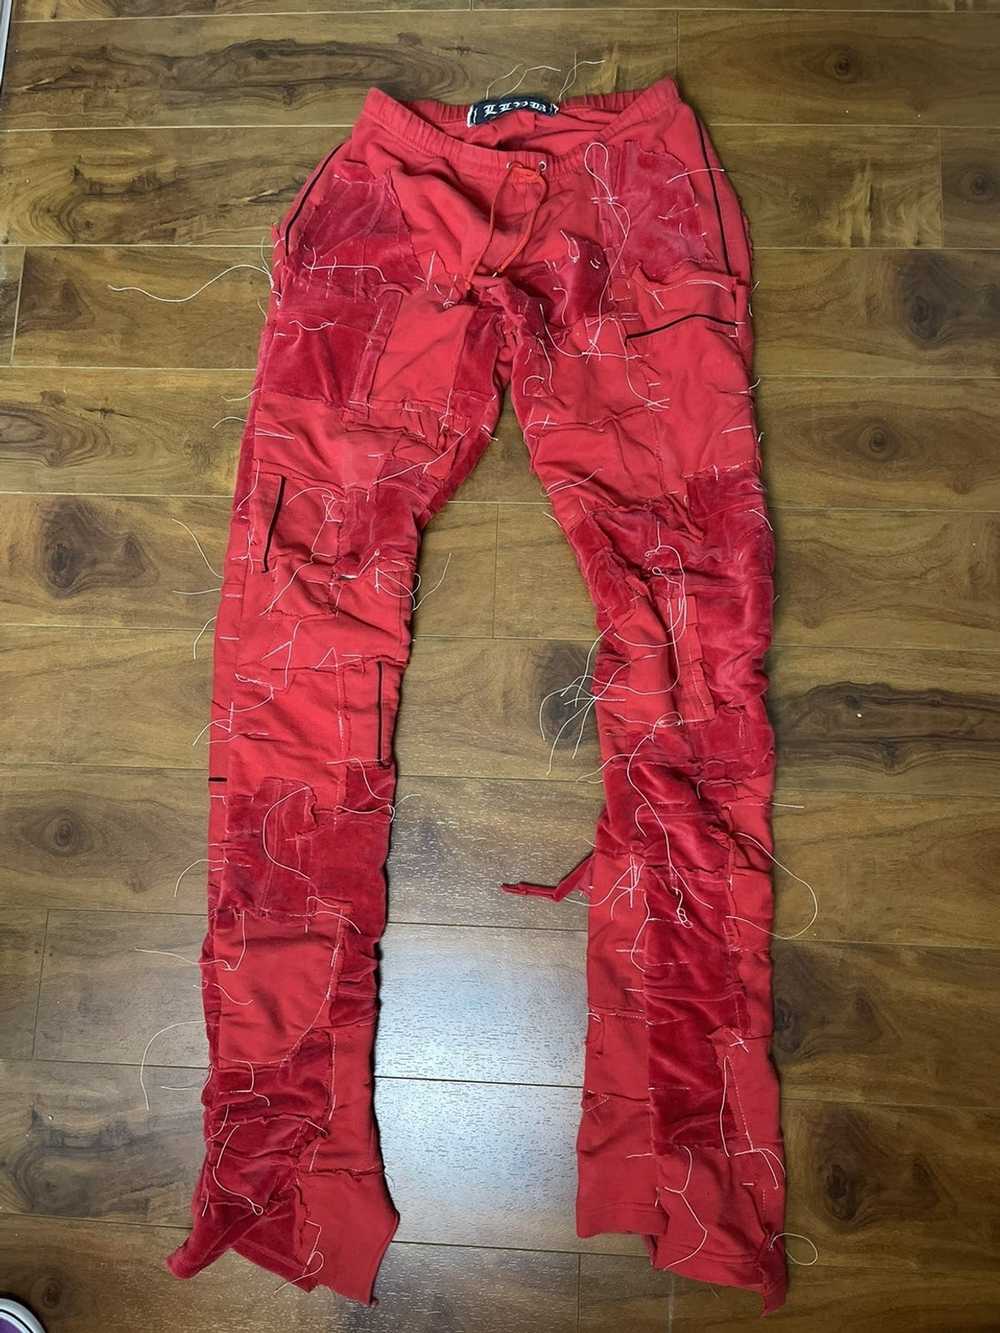 Vintage Upcycled mens joggers - image 1